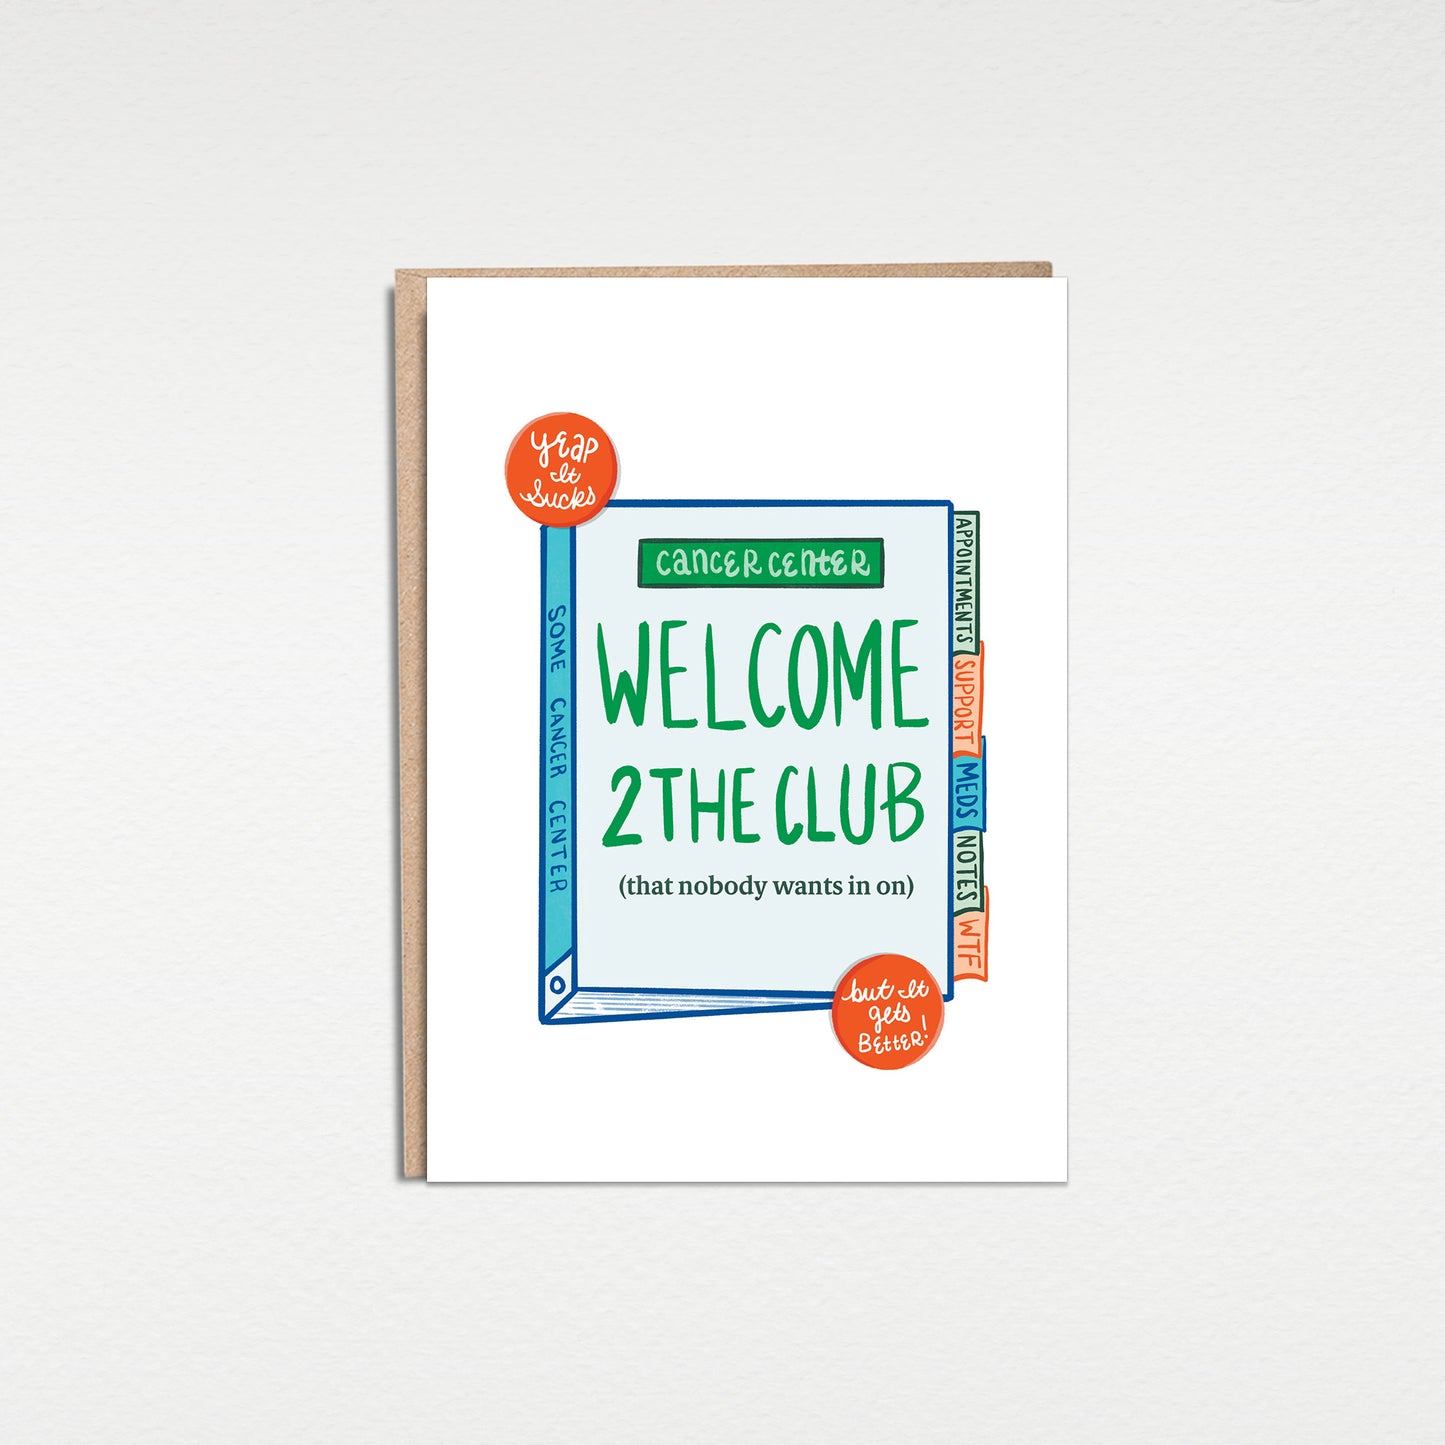 Welcome to the Cancer Club cancer 5x7” greeting card from Goods Made By Digitrillnana, Ashley Fletcher. Black Woman Owned. Perfect card for loved one with cancer, cancer diagnosis. Encouragement cards for cancer patients.